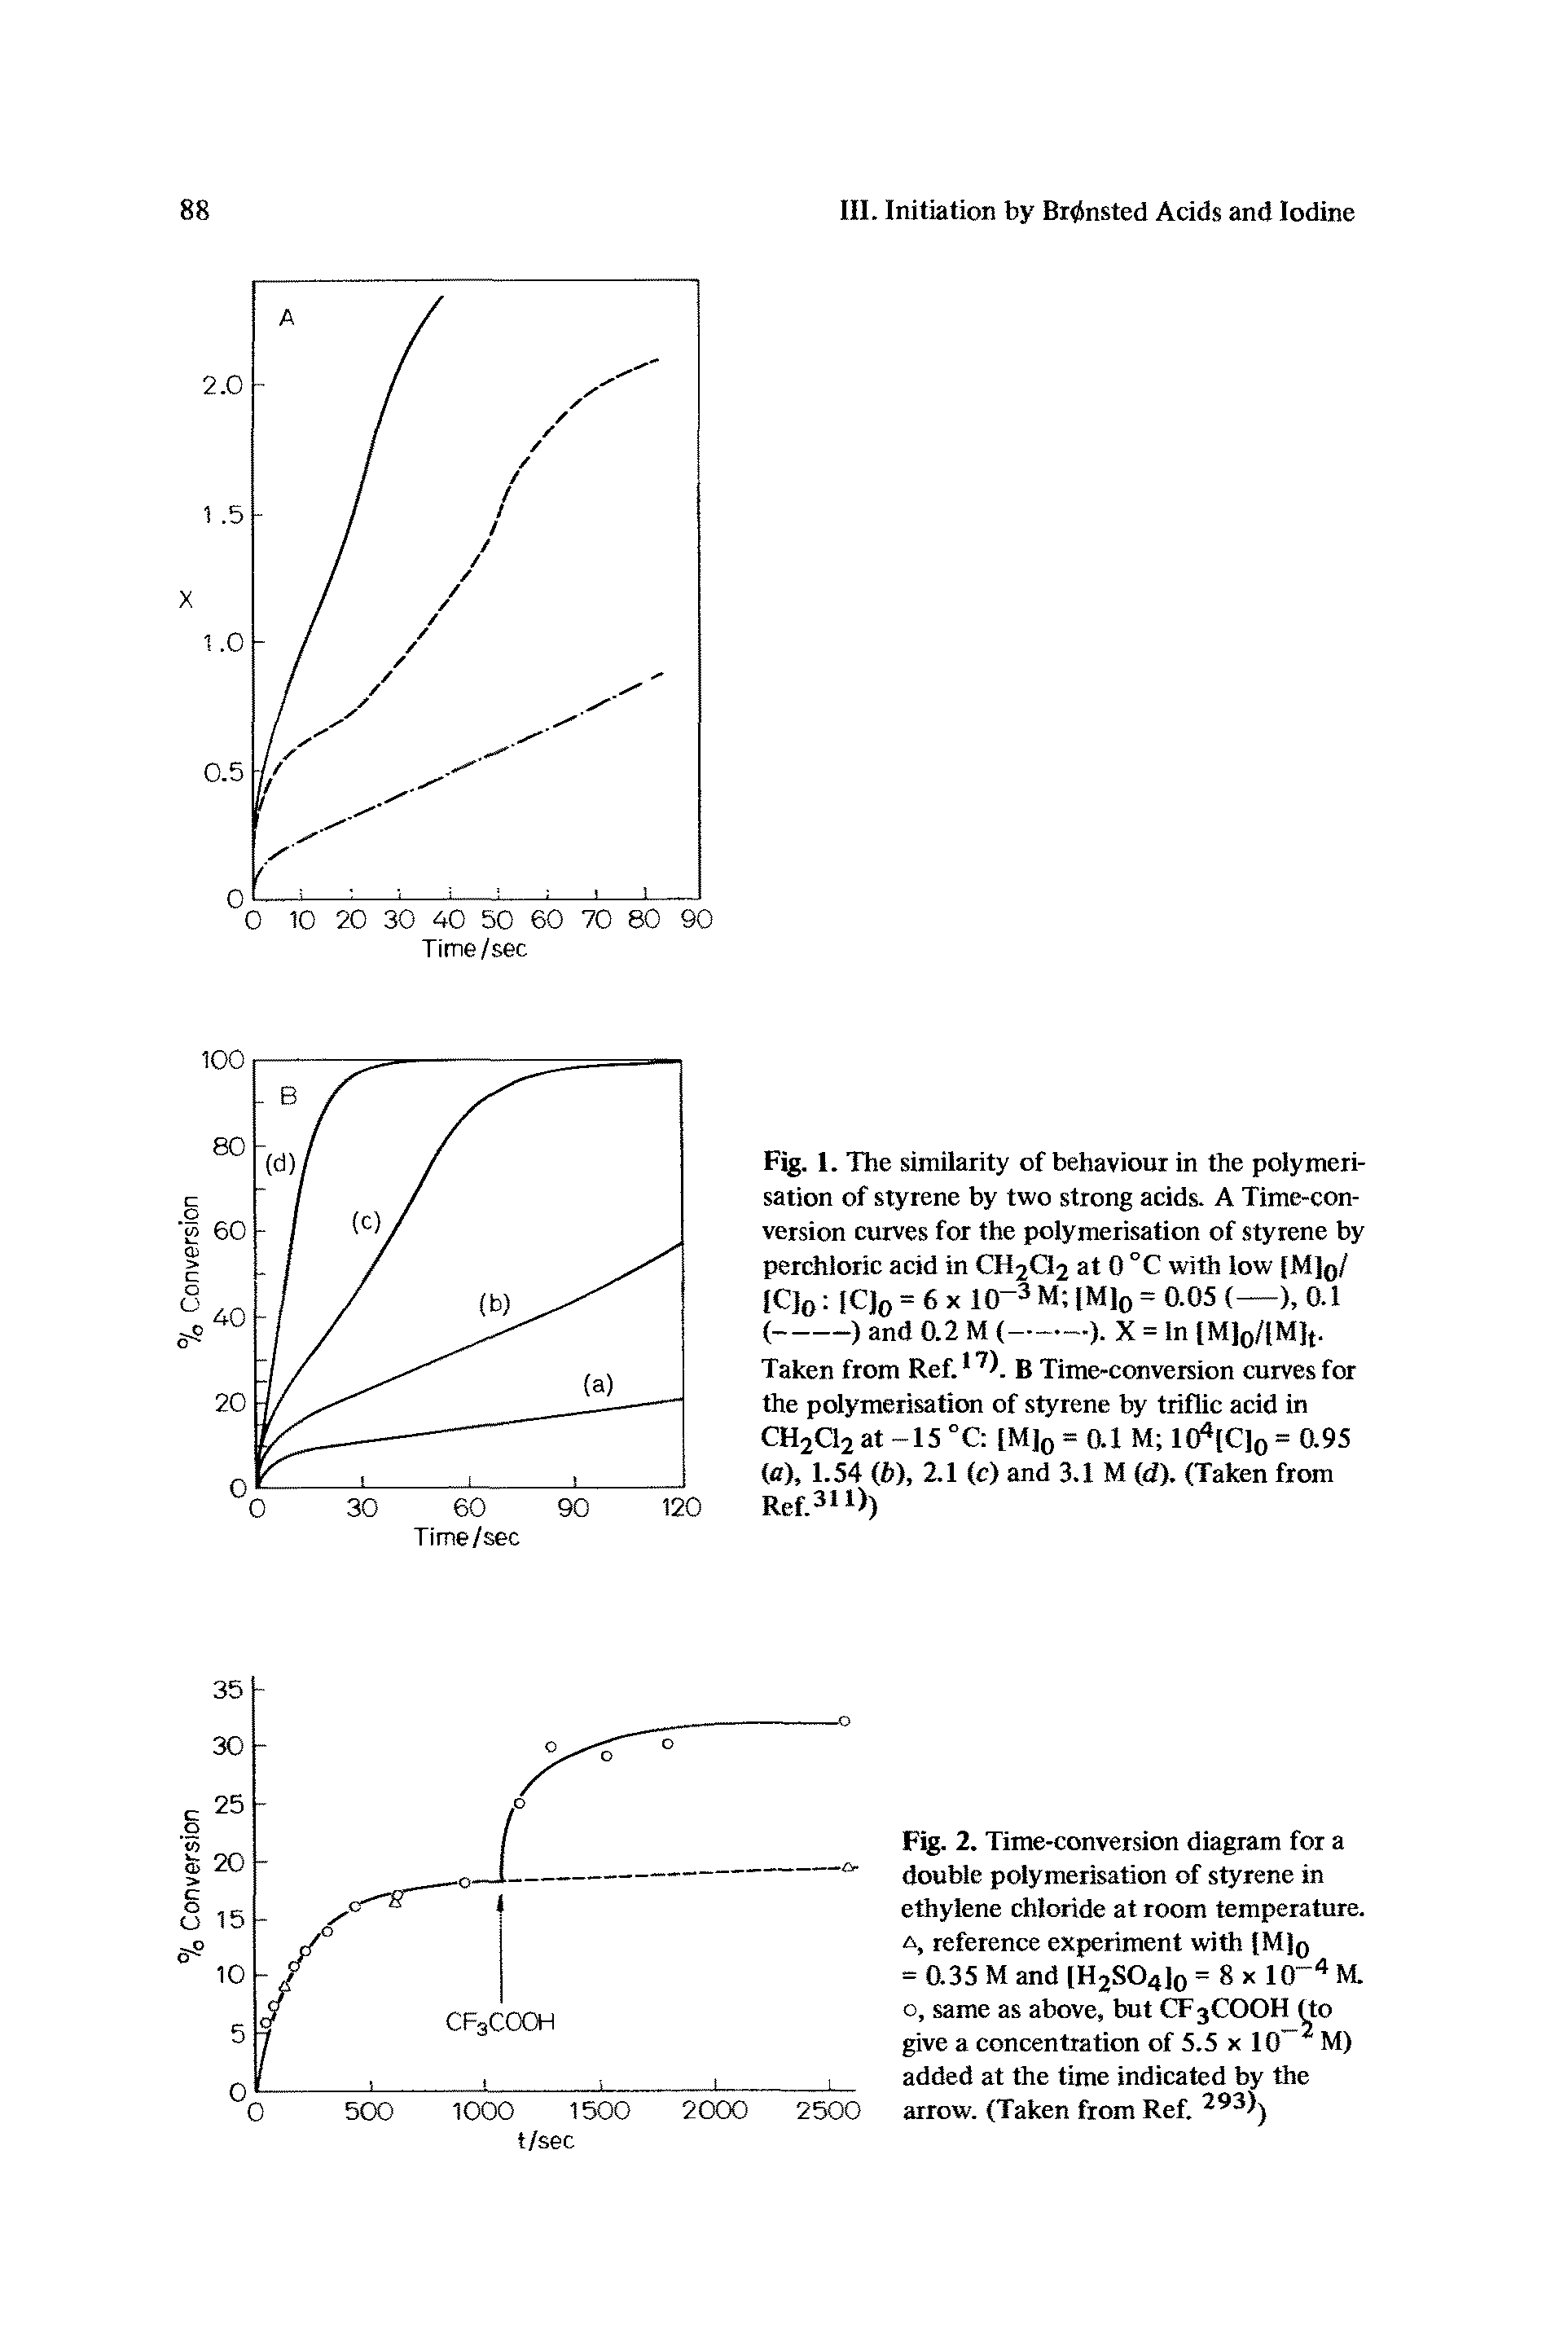 Fig. 2. Time-conversion diagram for a double polymerisation of styrene in ethylene chloride at room temperature. A, reference experiment with IM)o = 0.35 M and IH2S04]q = 8 x 10" M. o, same as above, but CF3COOH (to give a concentration of 5.5 x 10 M) added at the time indicated by the arrow. (Taken from Ref. 293) ...